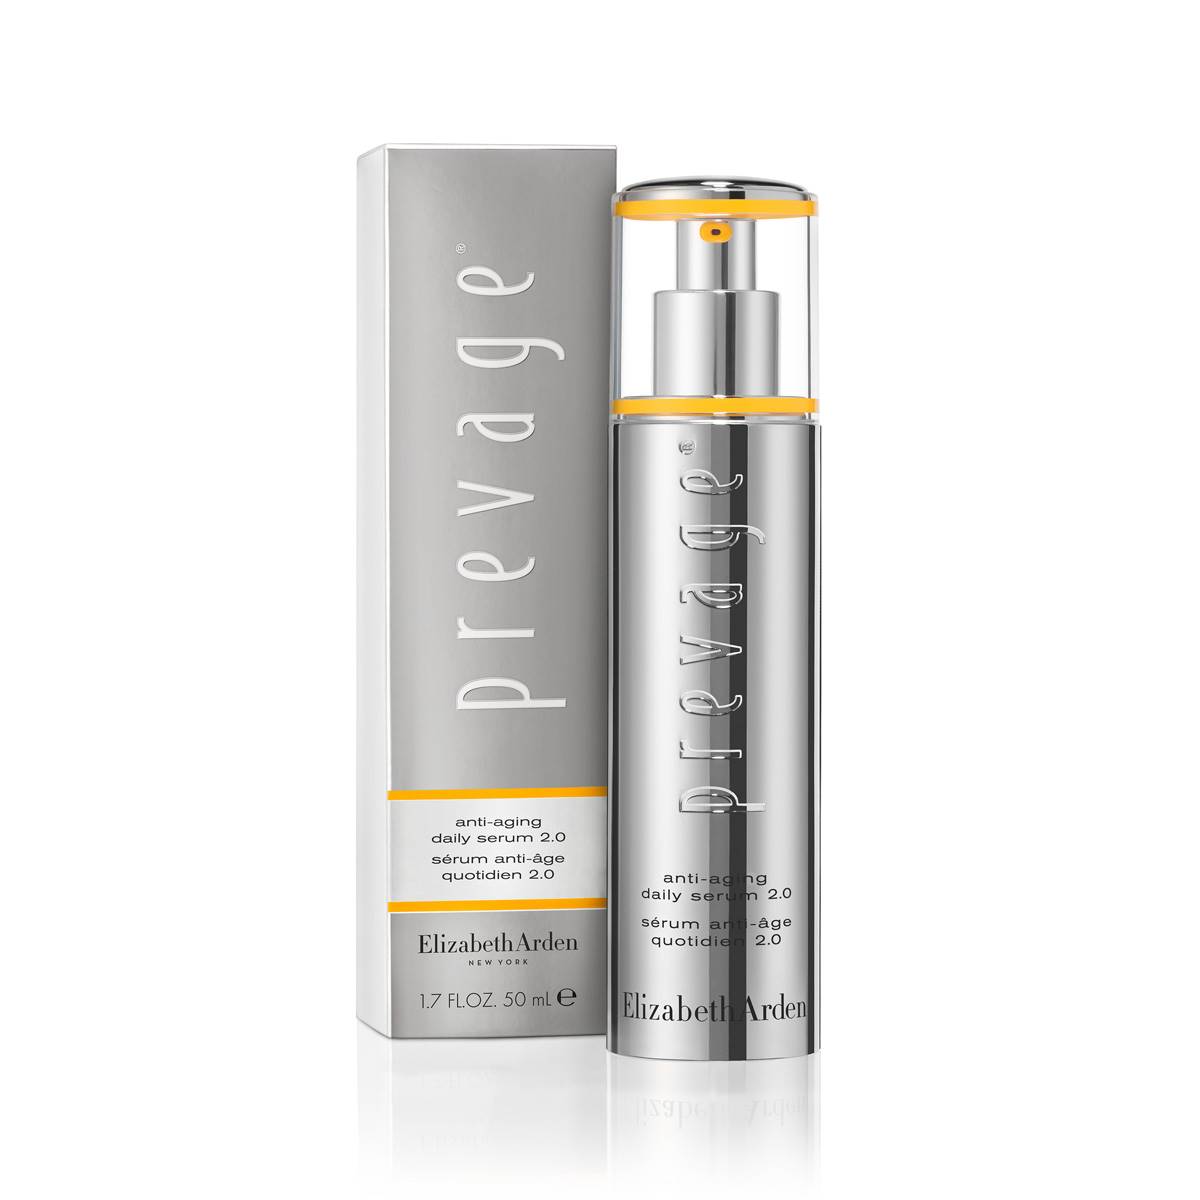 Open Video Modal for Elizabeth Arden Prevage 2.0 Anti-Aging Daily Serum